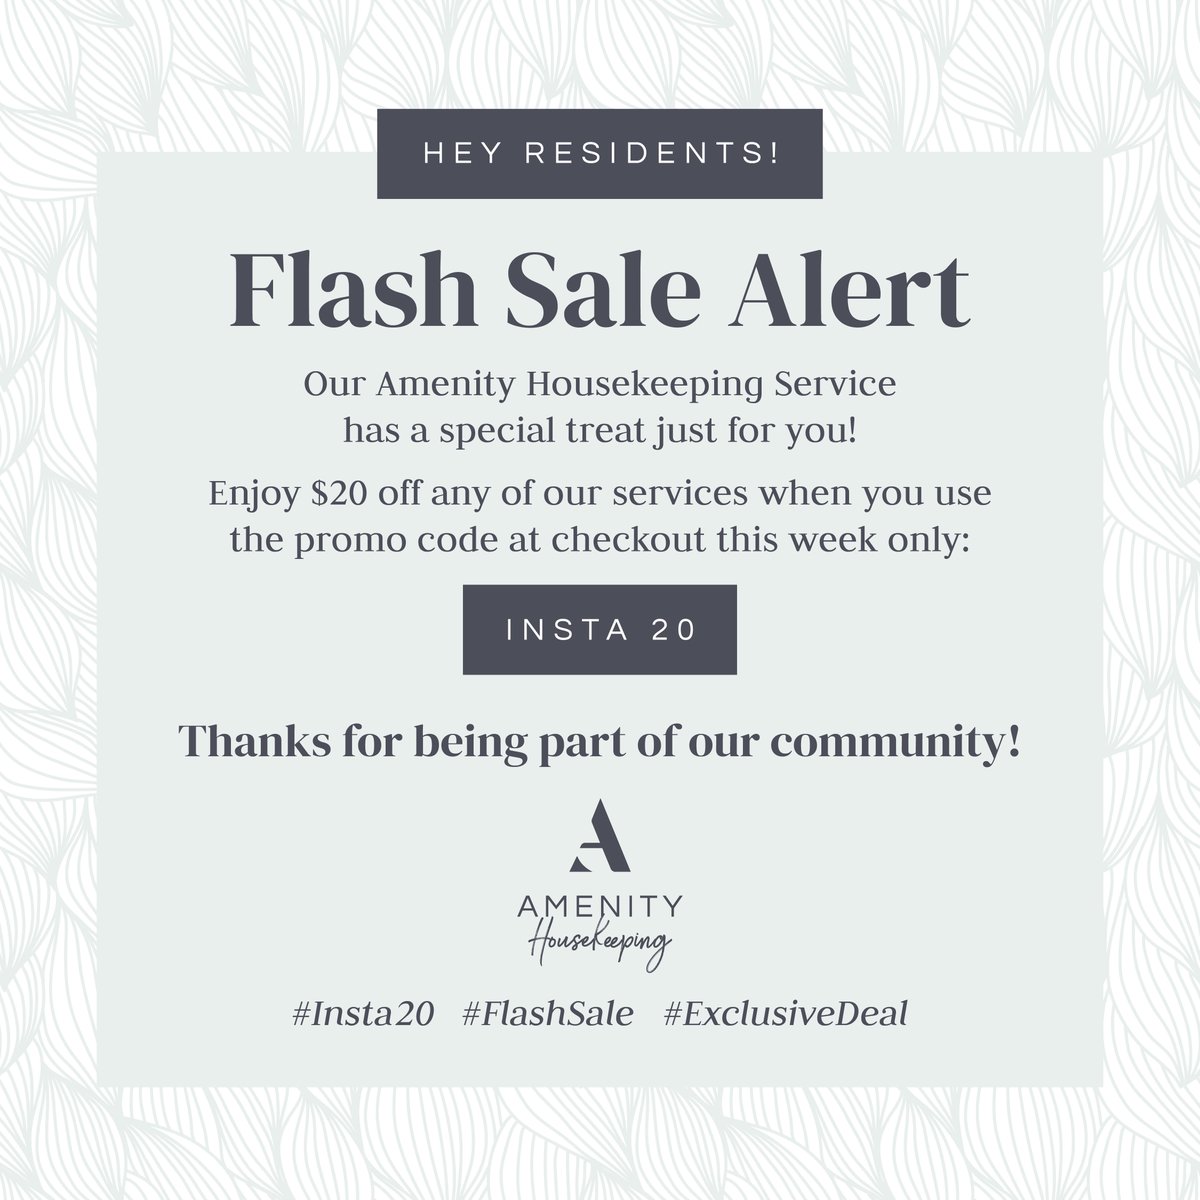 🎉 Insta20 Flash Sale Alert 🎉

☀️ Good morning neighbors! Our Amenity Housekeeping Service has a special treat just for you! Enjoy $20 off any of our services when you use the promo code 'insta20' at checkout this week only.

#Insta20 #FlashSale #ExclusiveDeal